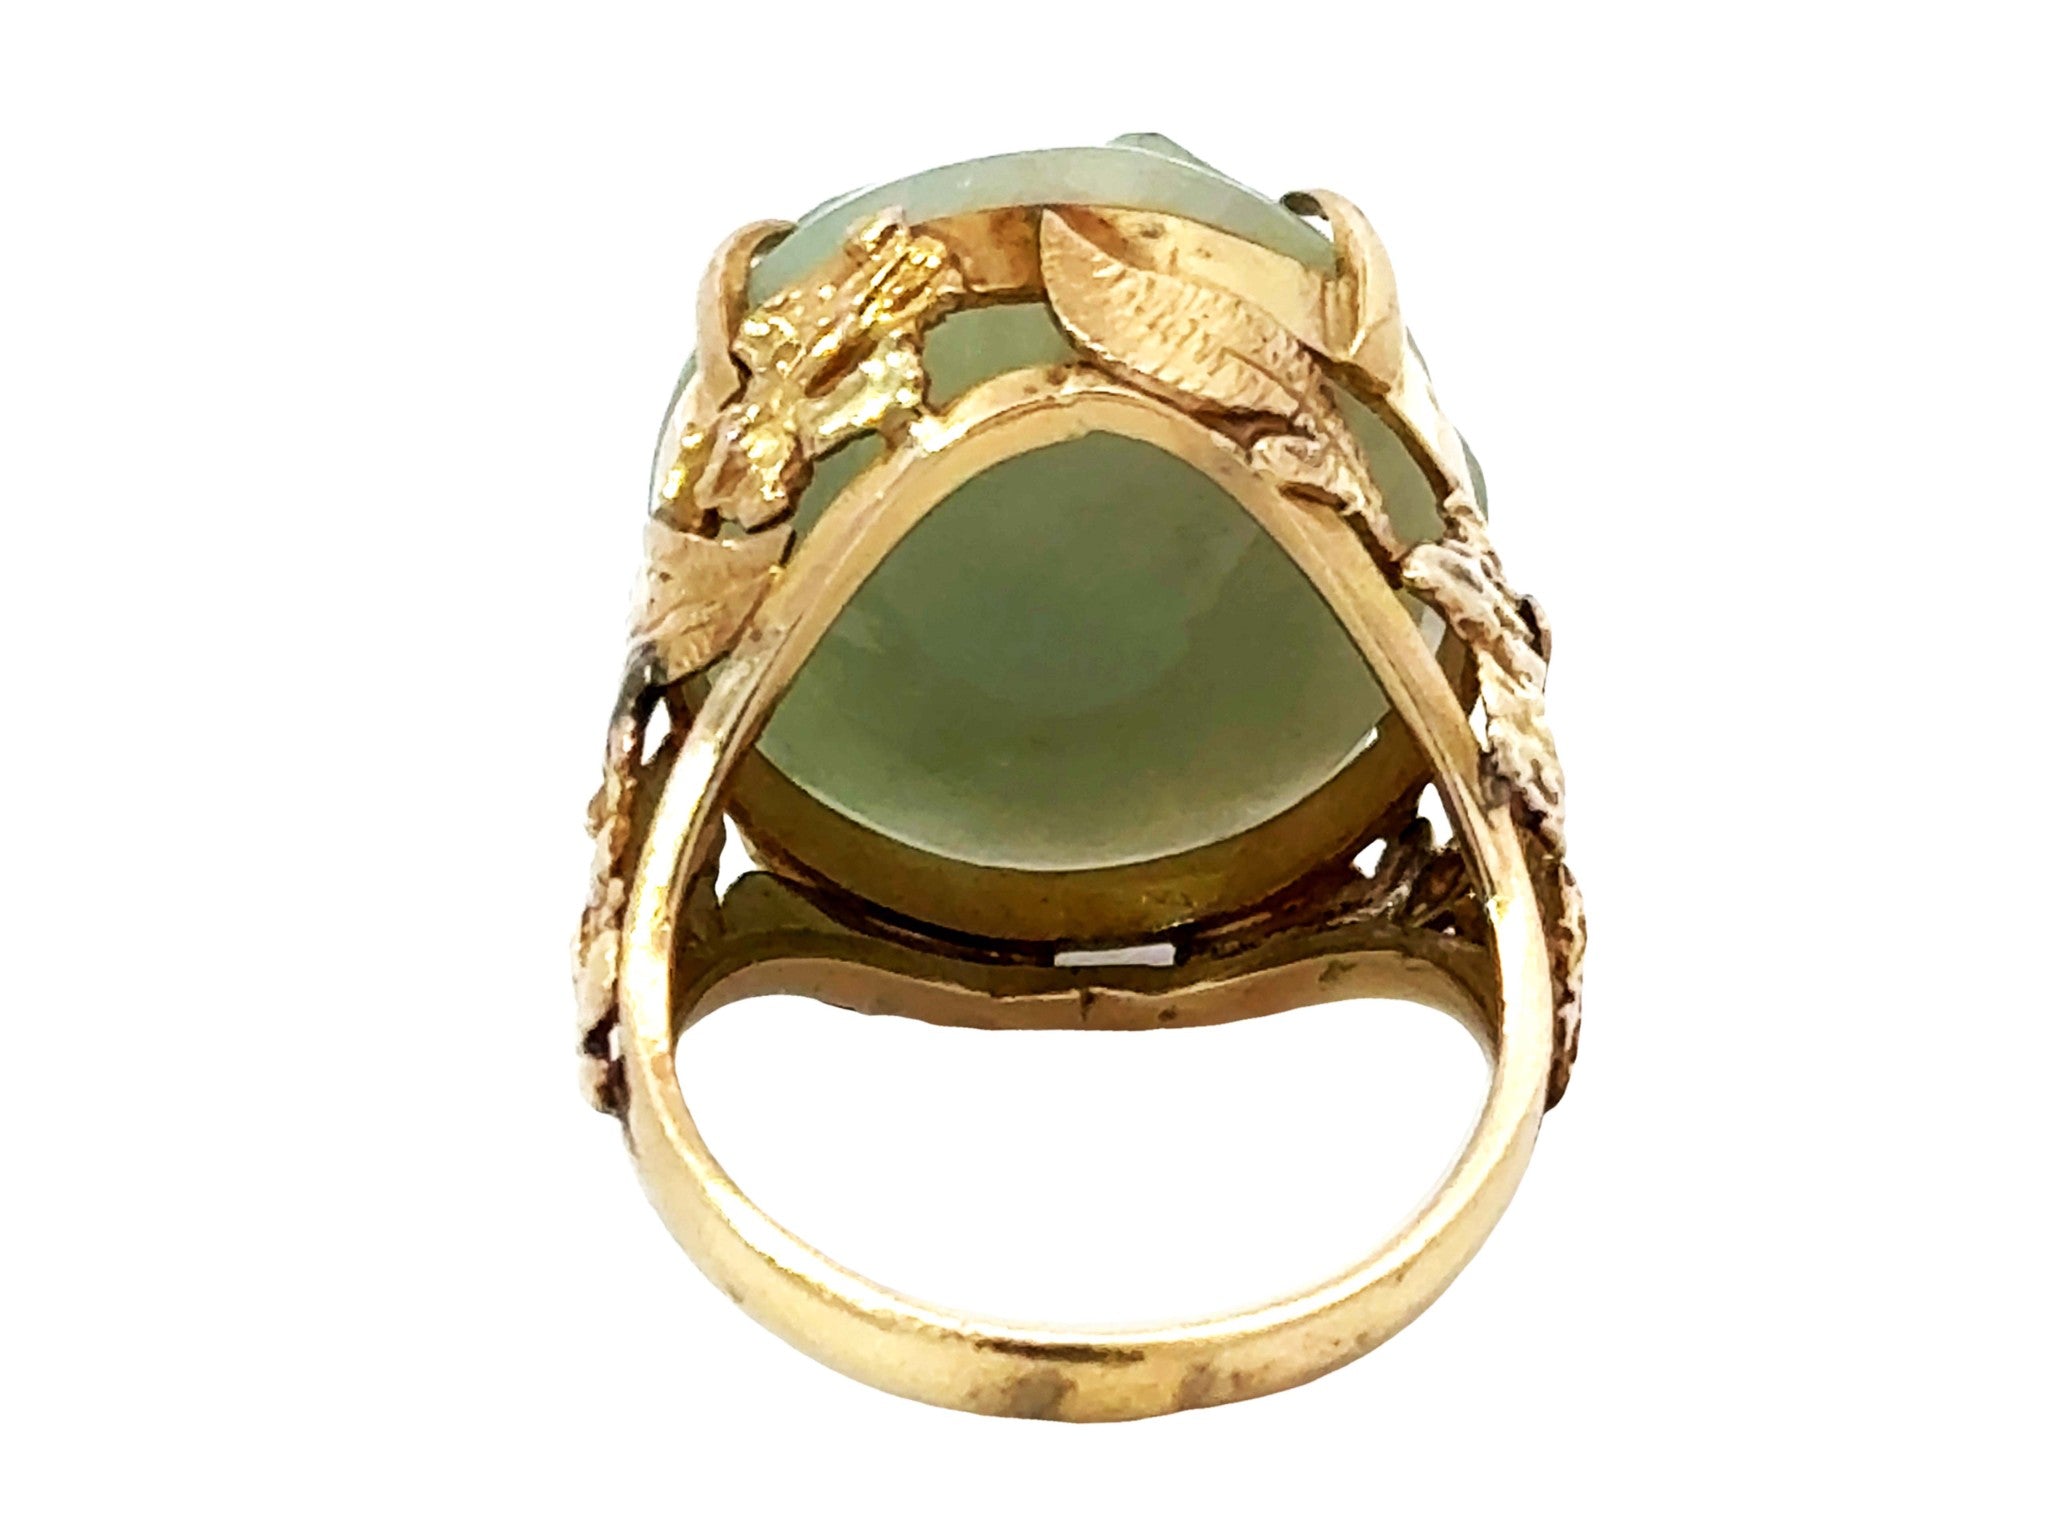 Carved Nephrite Jade Ring 14K Yellow Gold